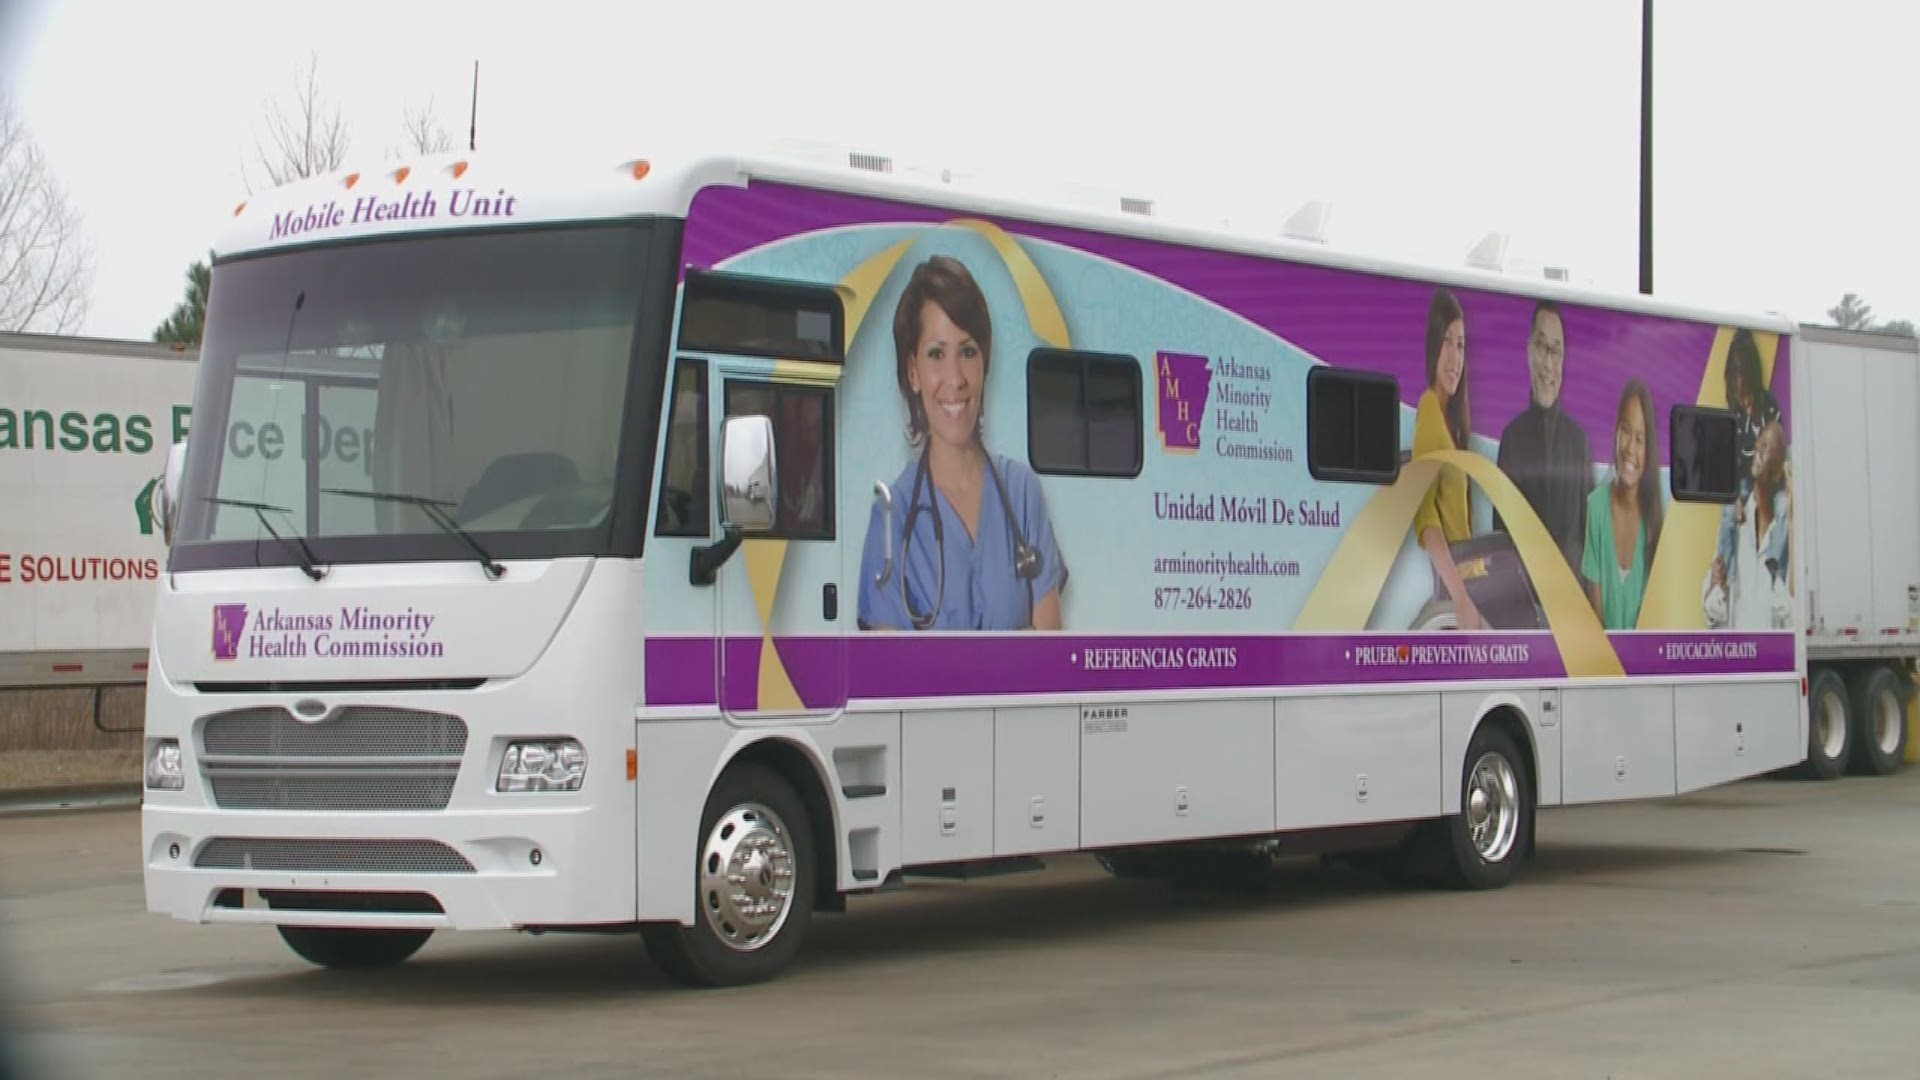 The Arkansas Minority Health Commission  is celebrating the debut of its mobile health unit that will allow the organization to drive to communities in need, in order to provide free preventative screenings.